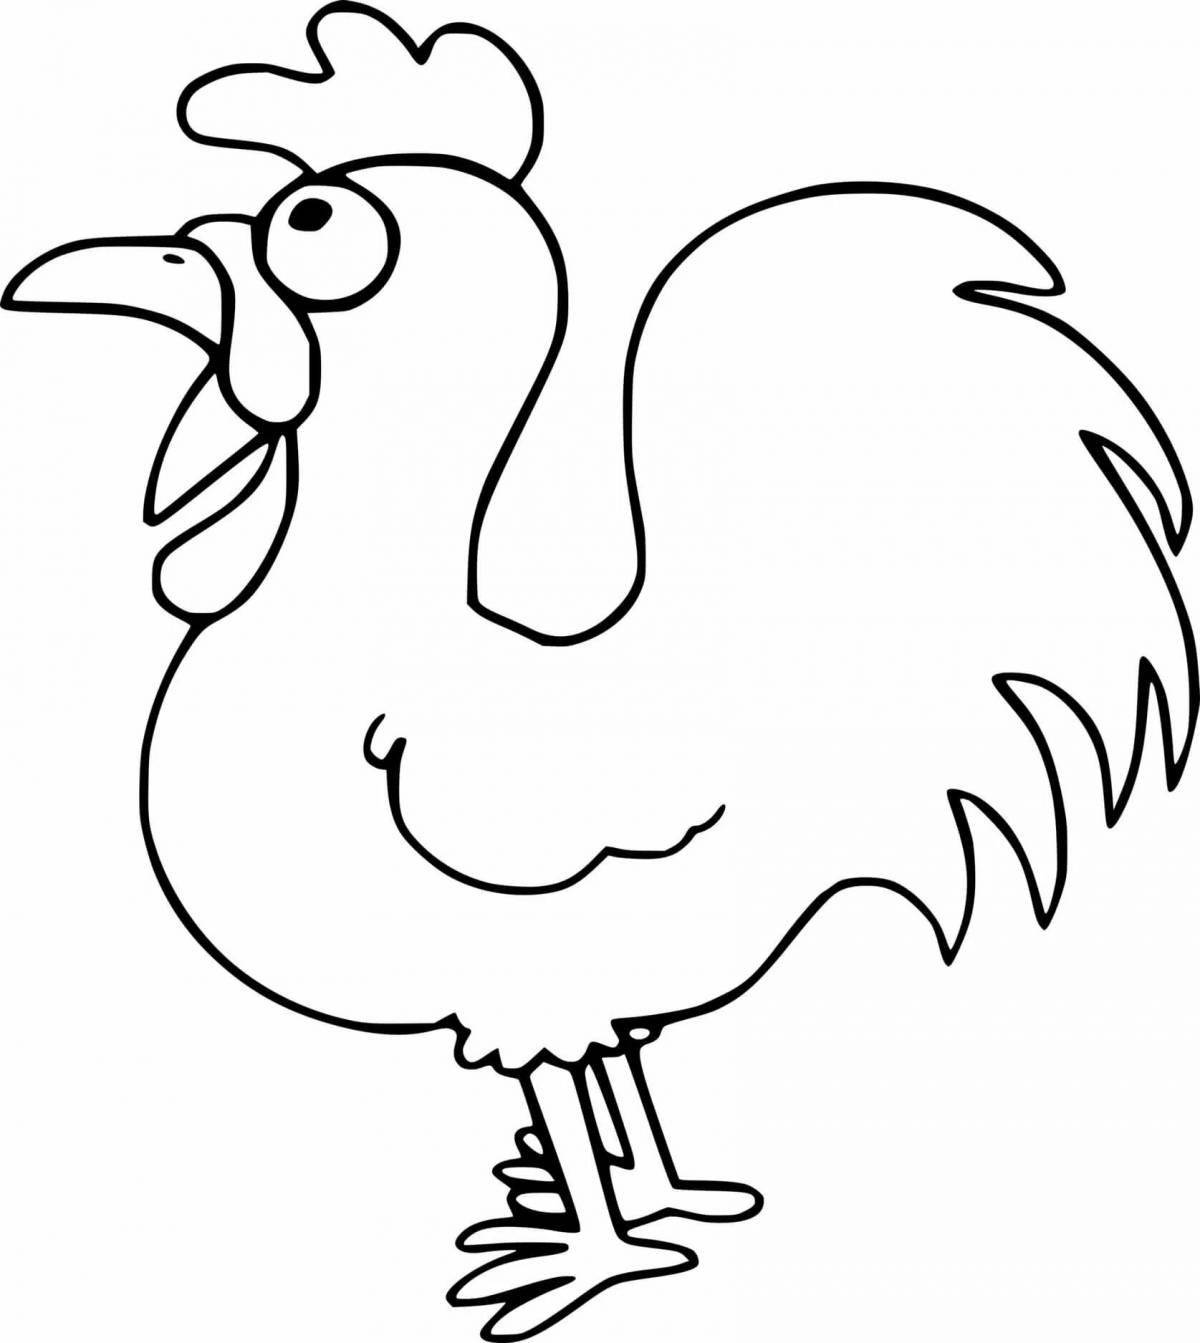 Live rooster coloring pages for kids